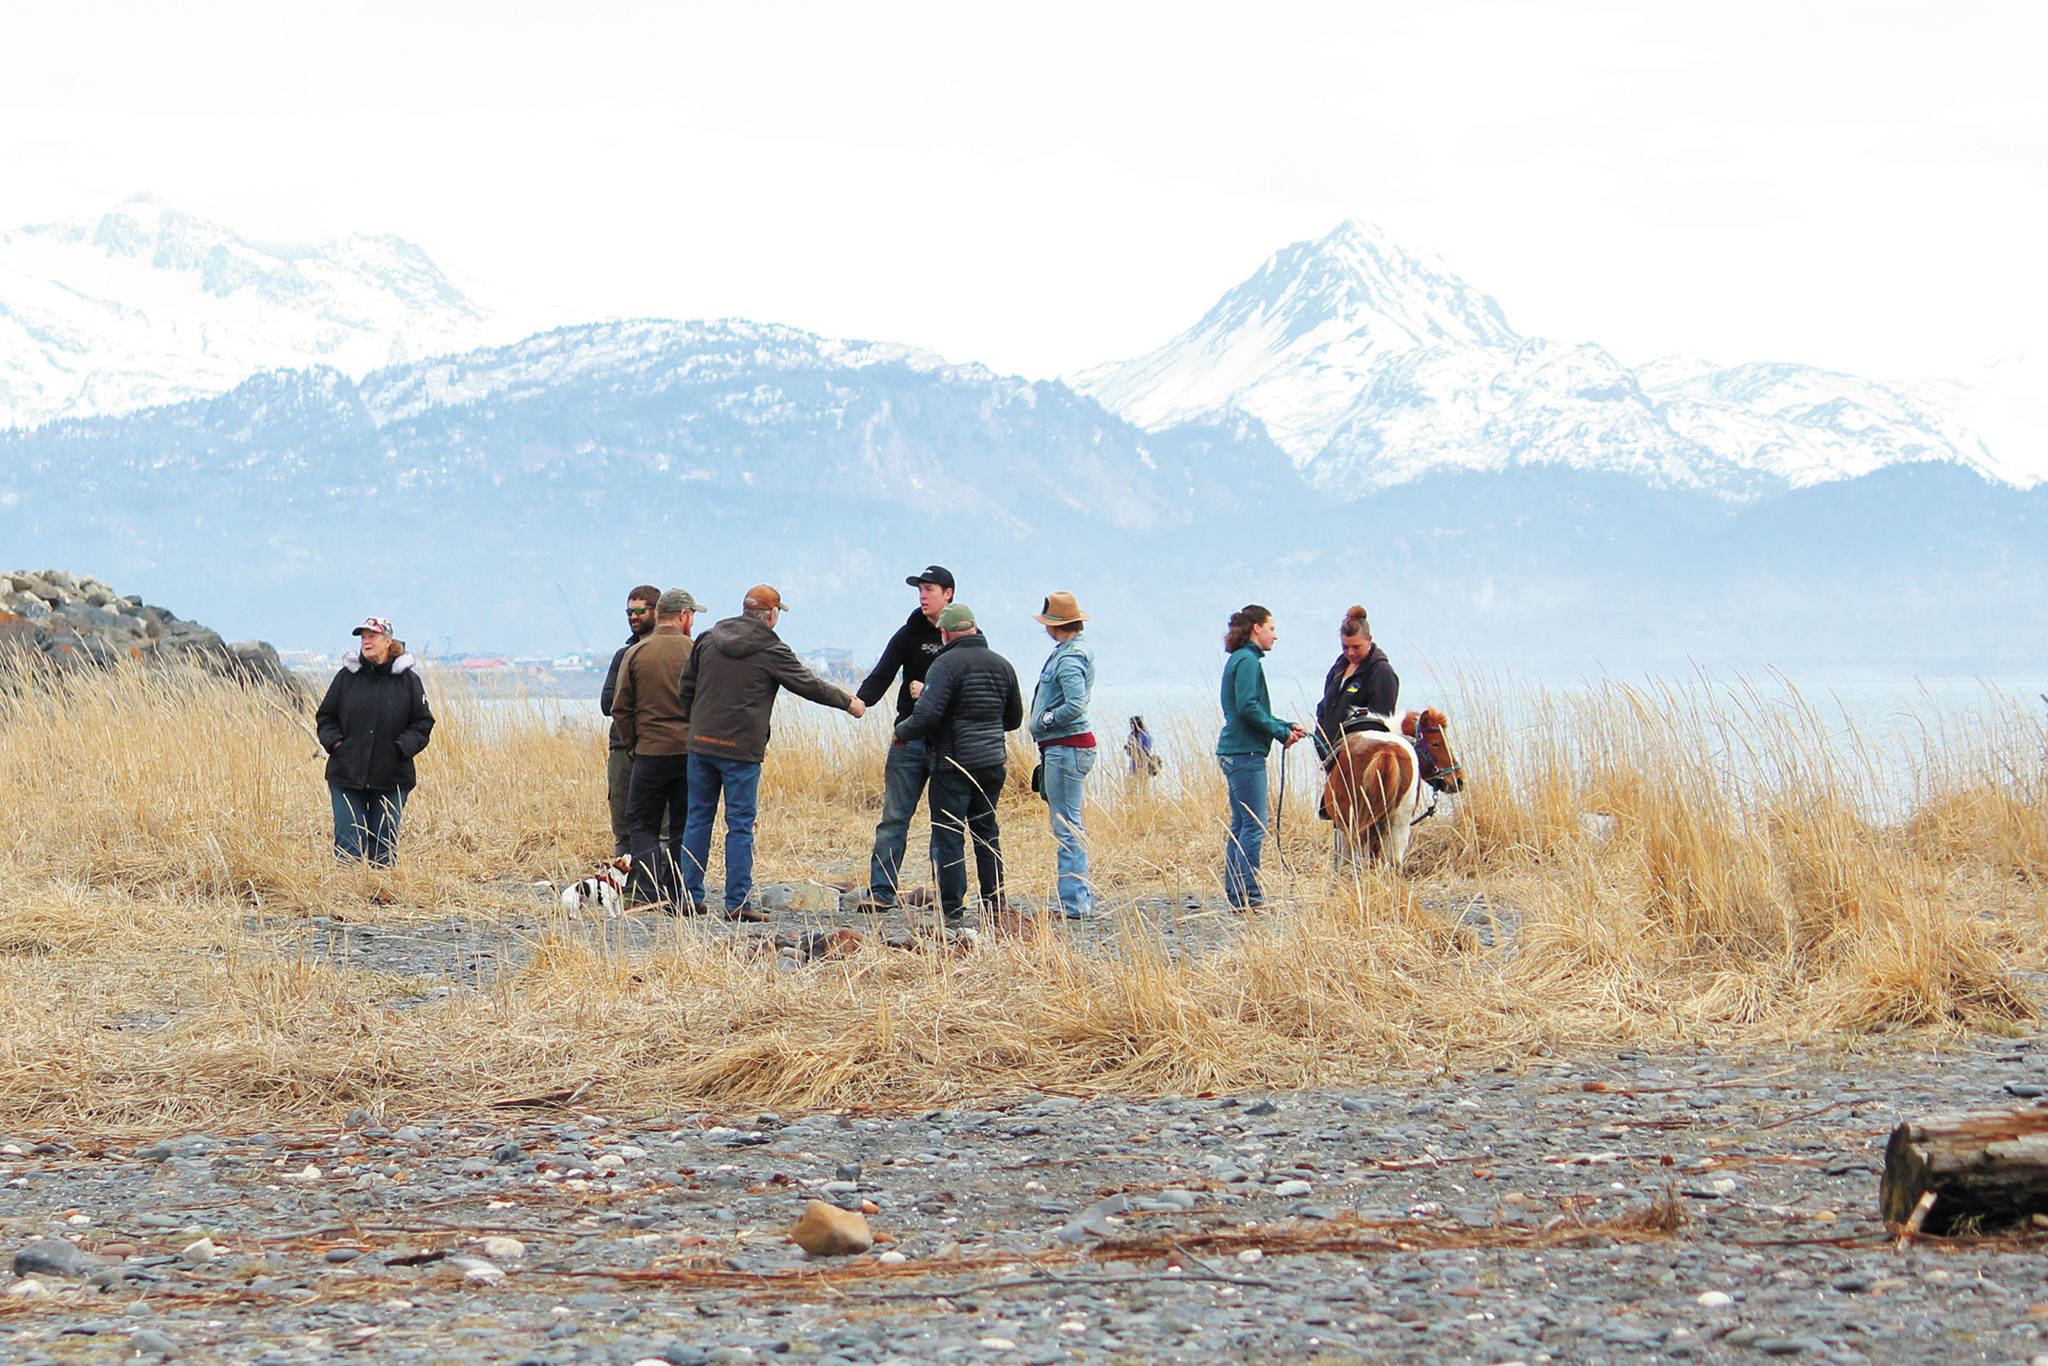 Two people shake hands at a community gathering and barbecue at the beach Saturday, April 18, 2020 at Mariner Park in Homer, Alaska. The event was hosted by Homer’s Sons of Liberty to assert the right to assemble. Organizers said attendees were encouraged to practice social distancing guidelines. (Photo by Megan Pacer/Homer News)